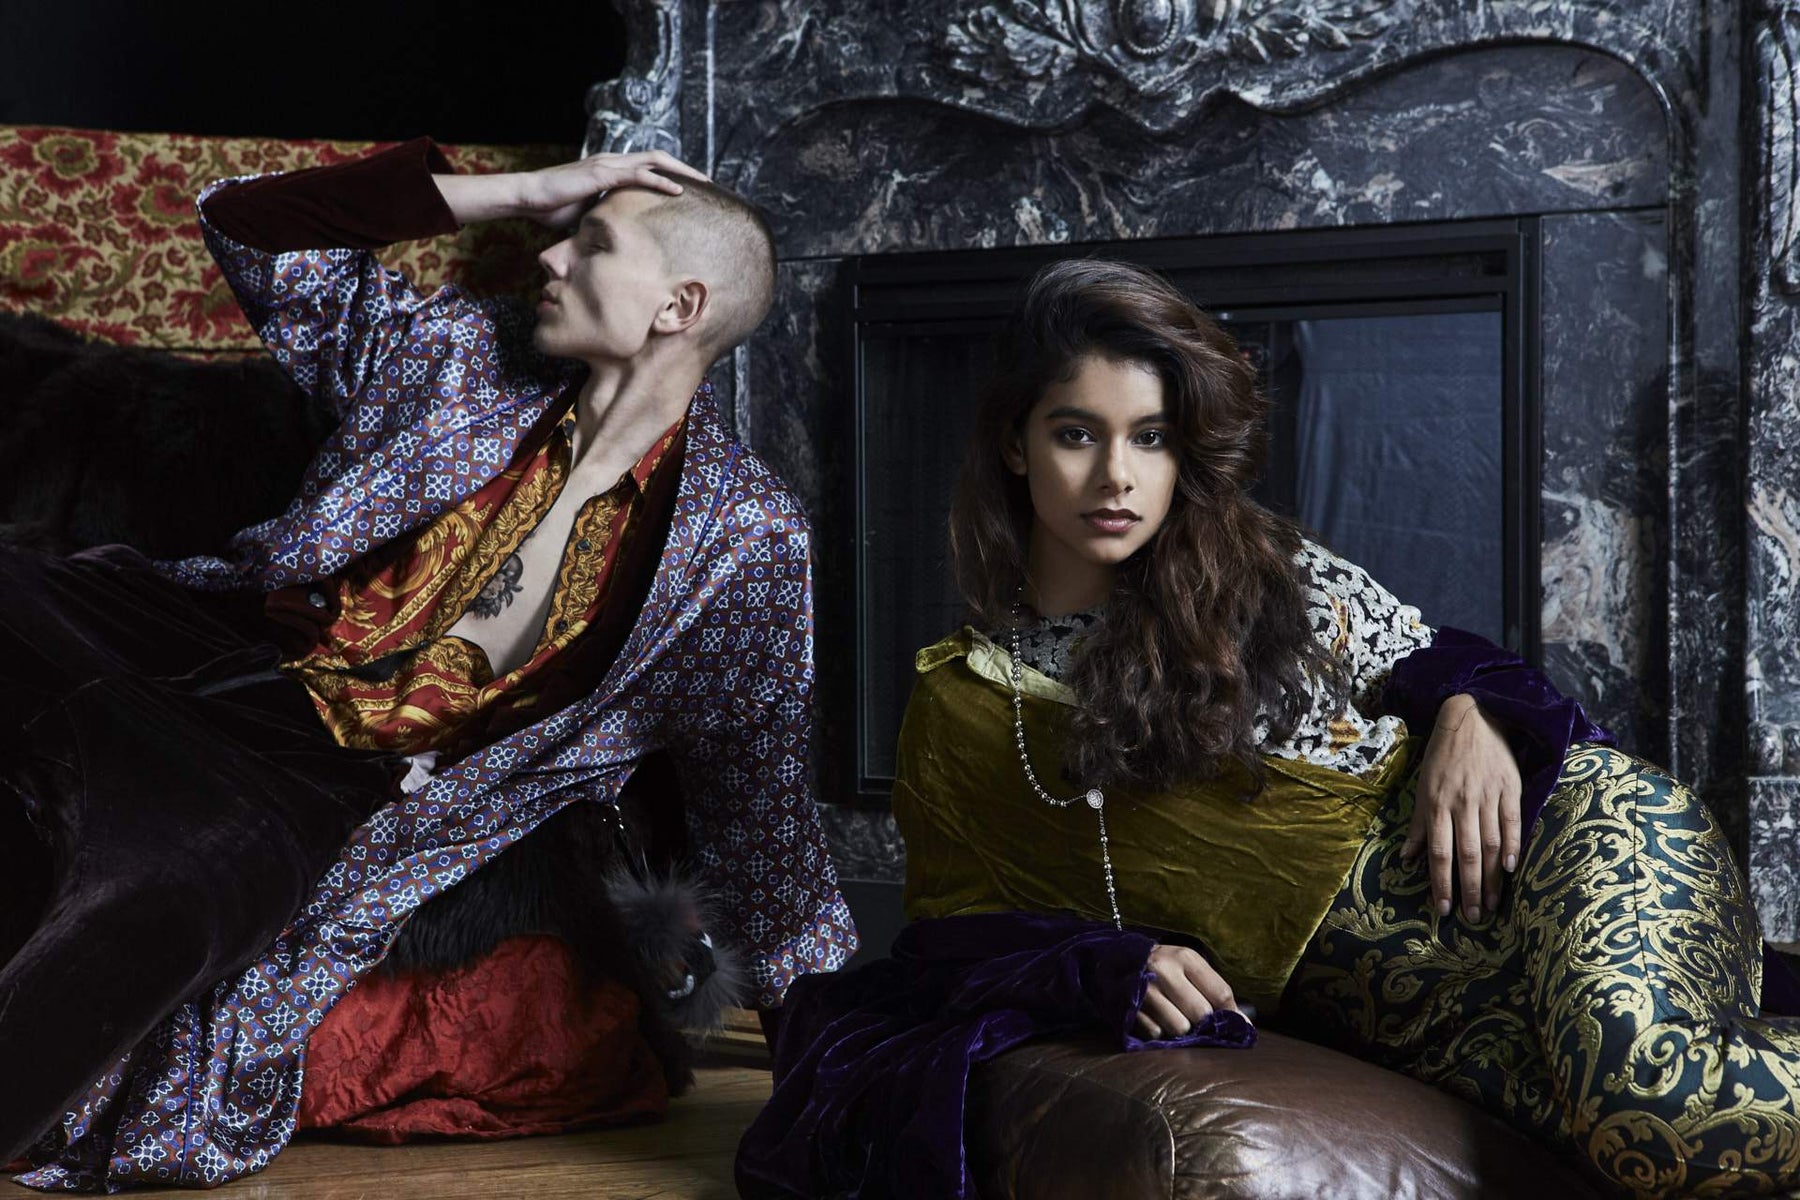 models posing in mixed prints lounging in front of a fire place